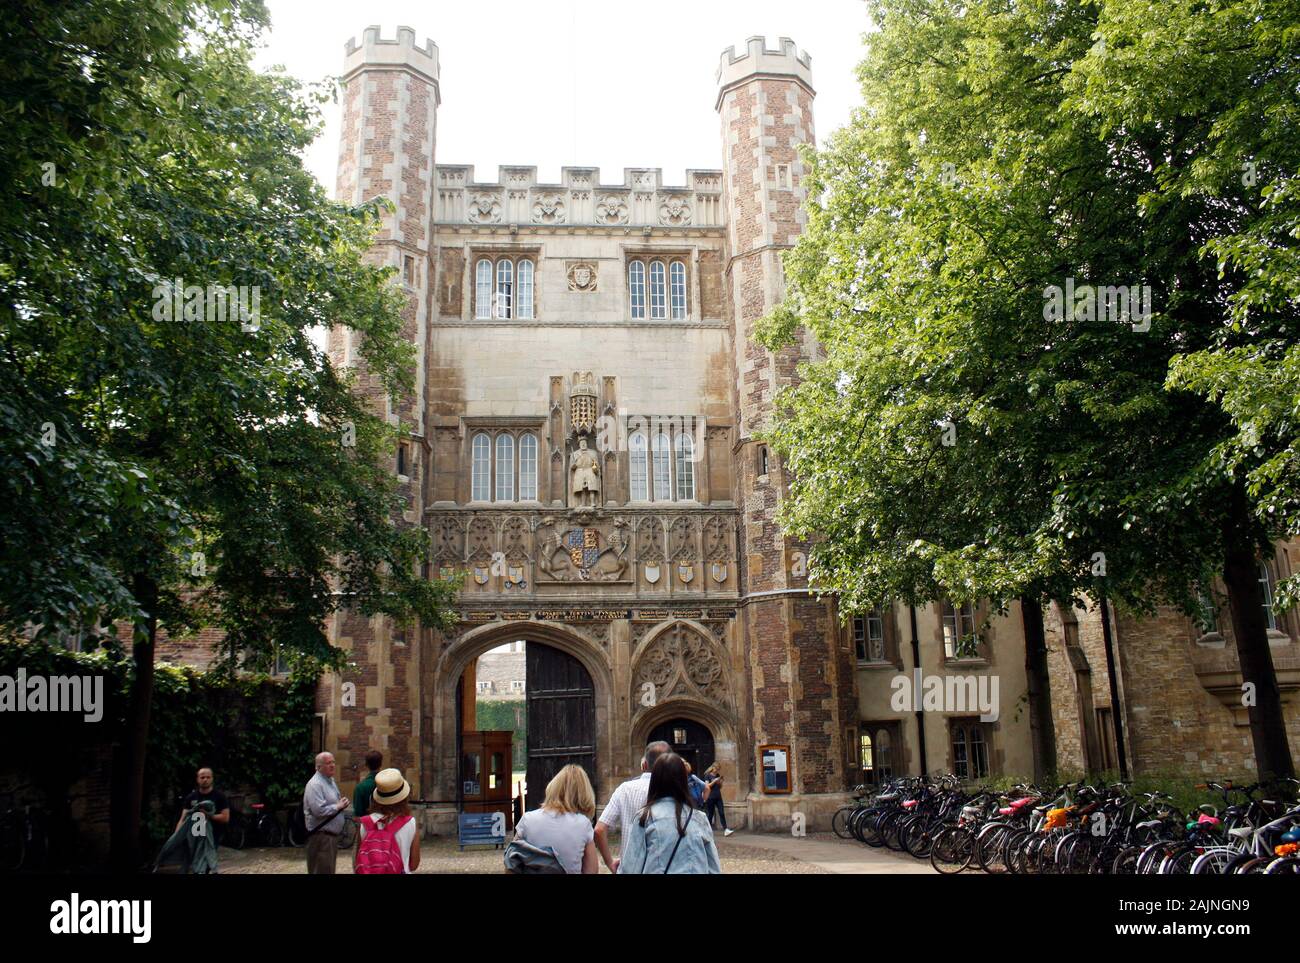 King’s College side tower, cambridge, Uk Stock Photo